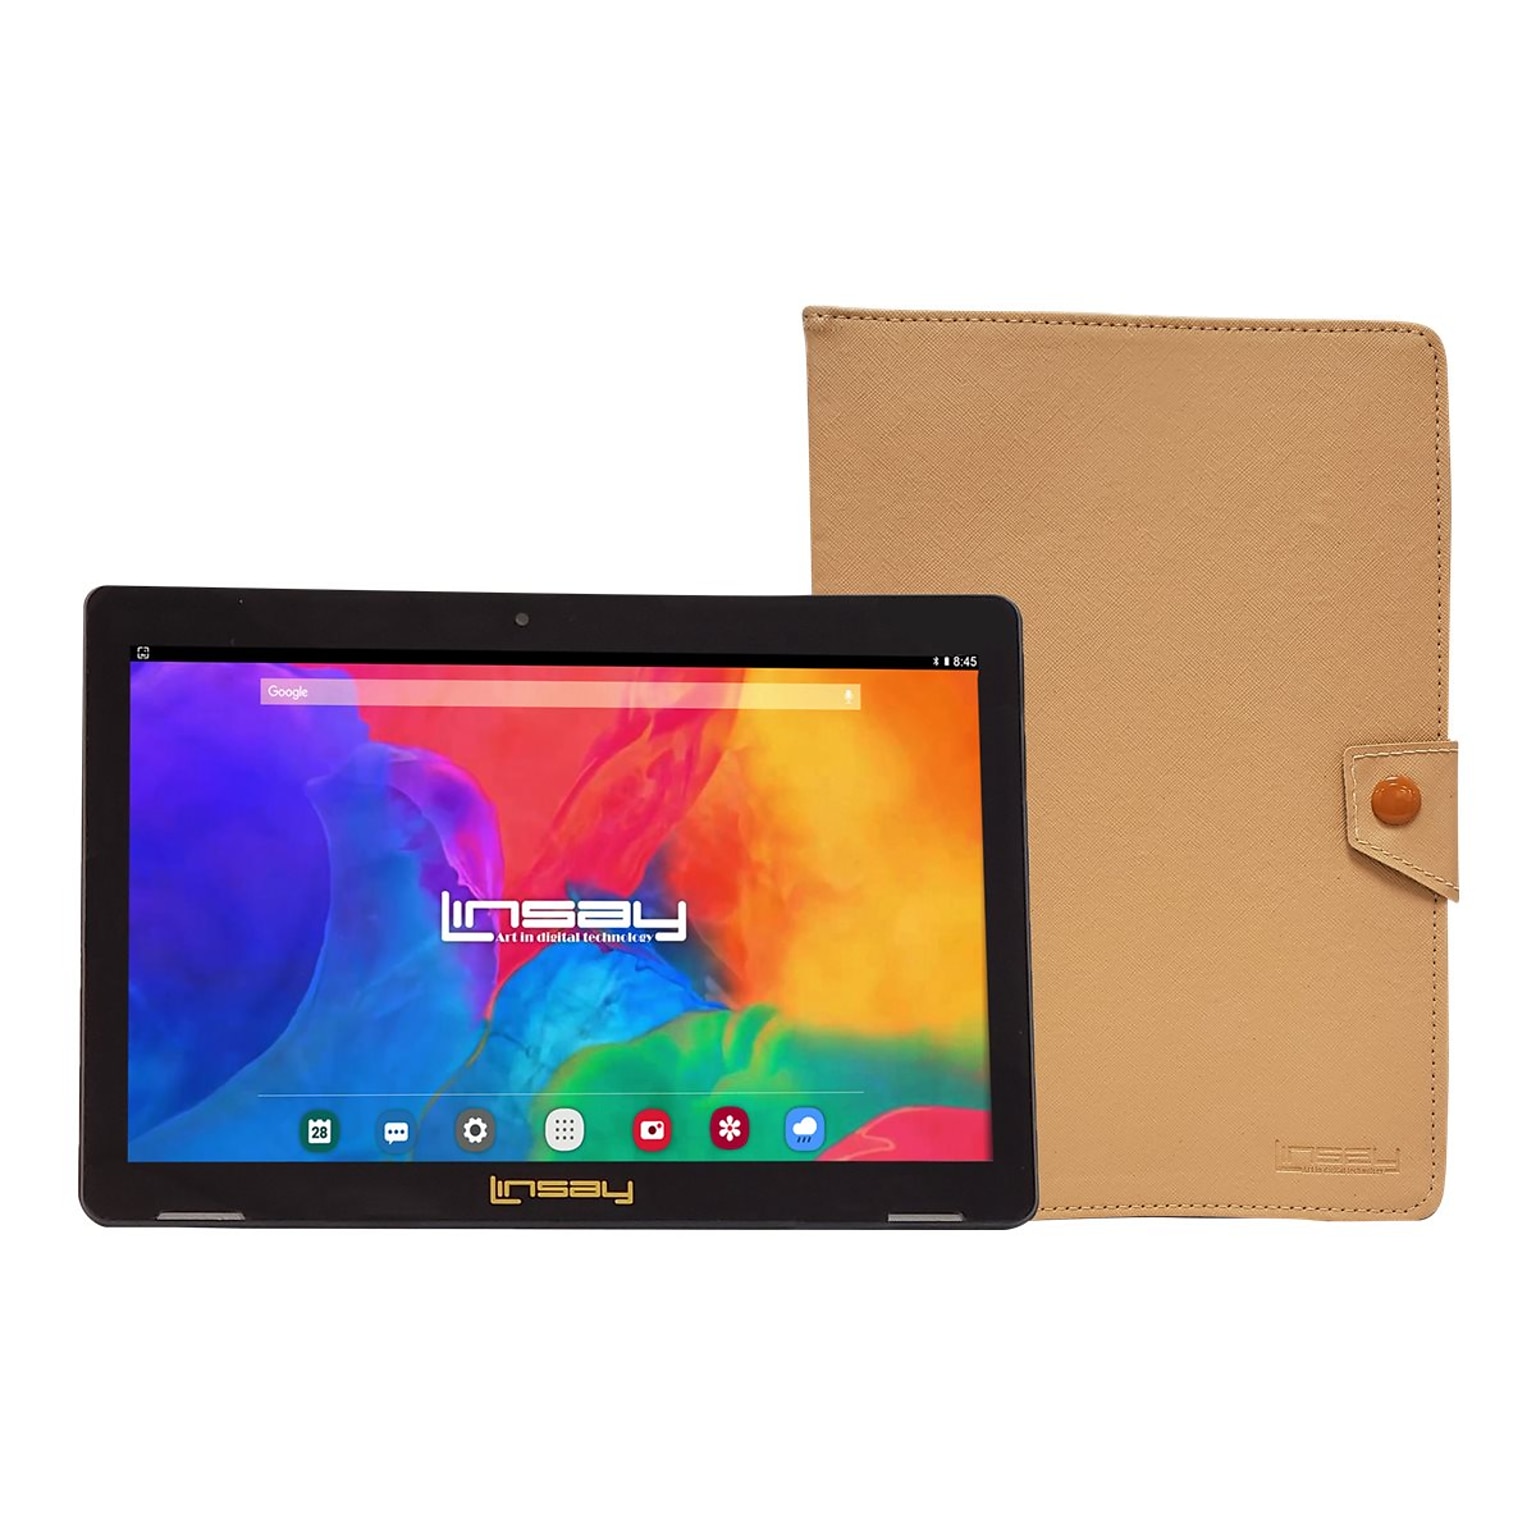 Linsay 10.1 Tablet with Case, WiFi, 2GB RAM, 64GB Storage, Android 13, Black/Light Brown (F10IPBCLBROWN)